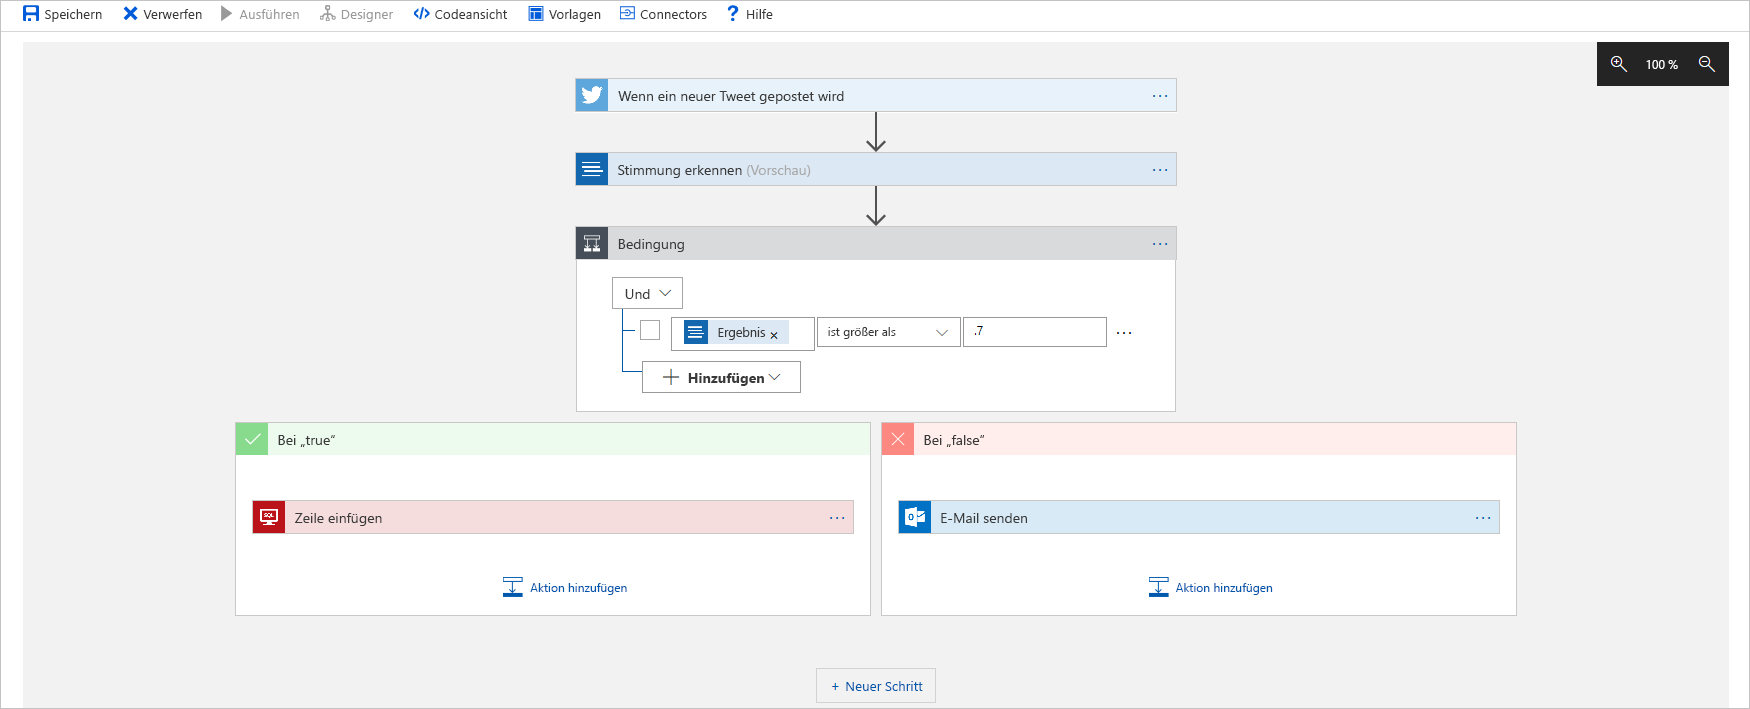 Screenshot shows example logic app workflow in the designer. A box for each step represents the trigger and each action. Arrows connect the boxes to show execution through the workflow.